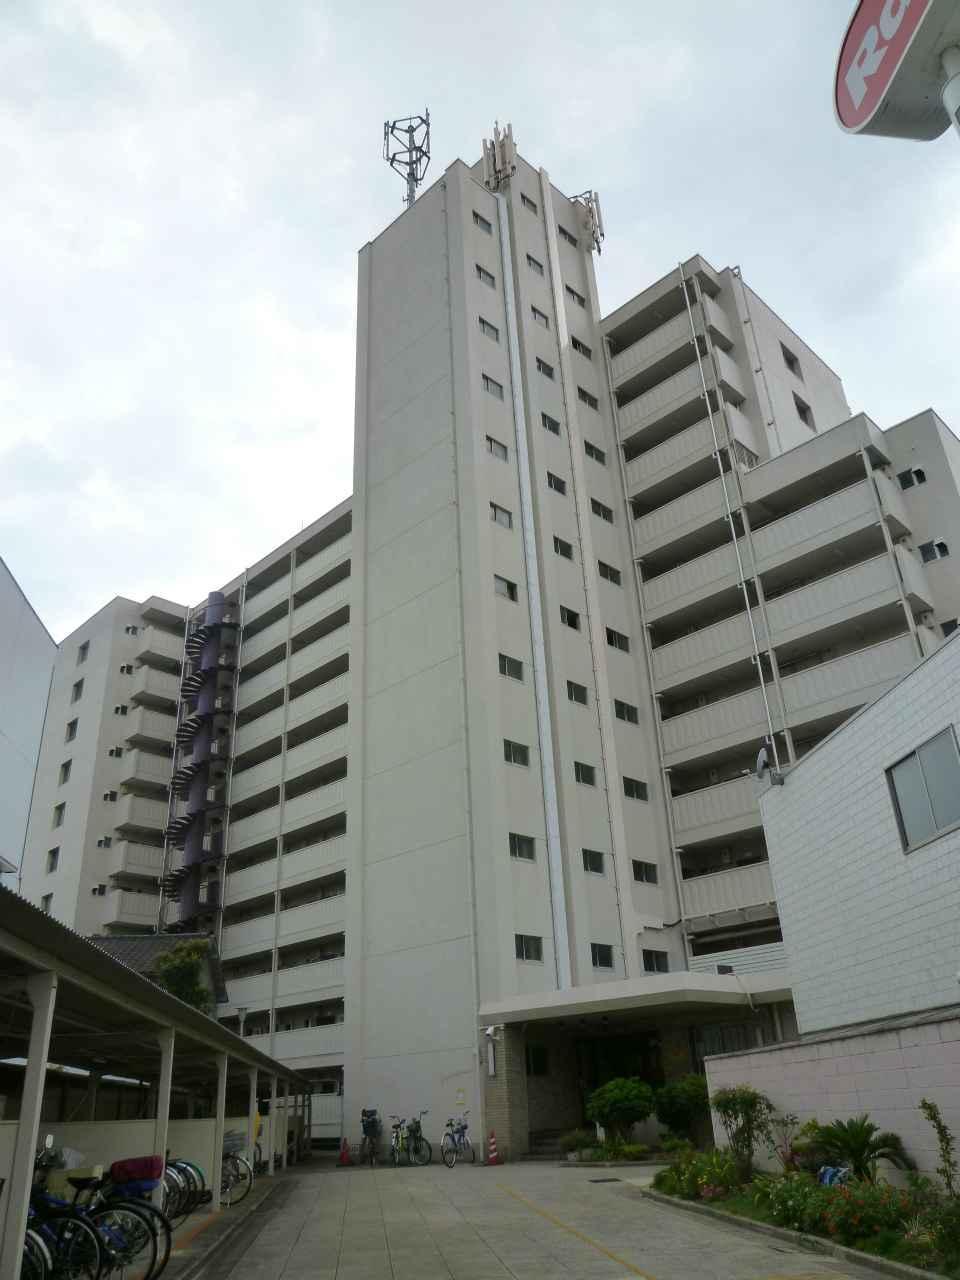 Local appearance photo. It is the apartment of 11-storey